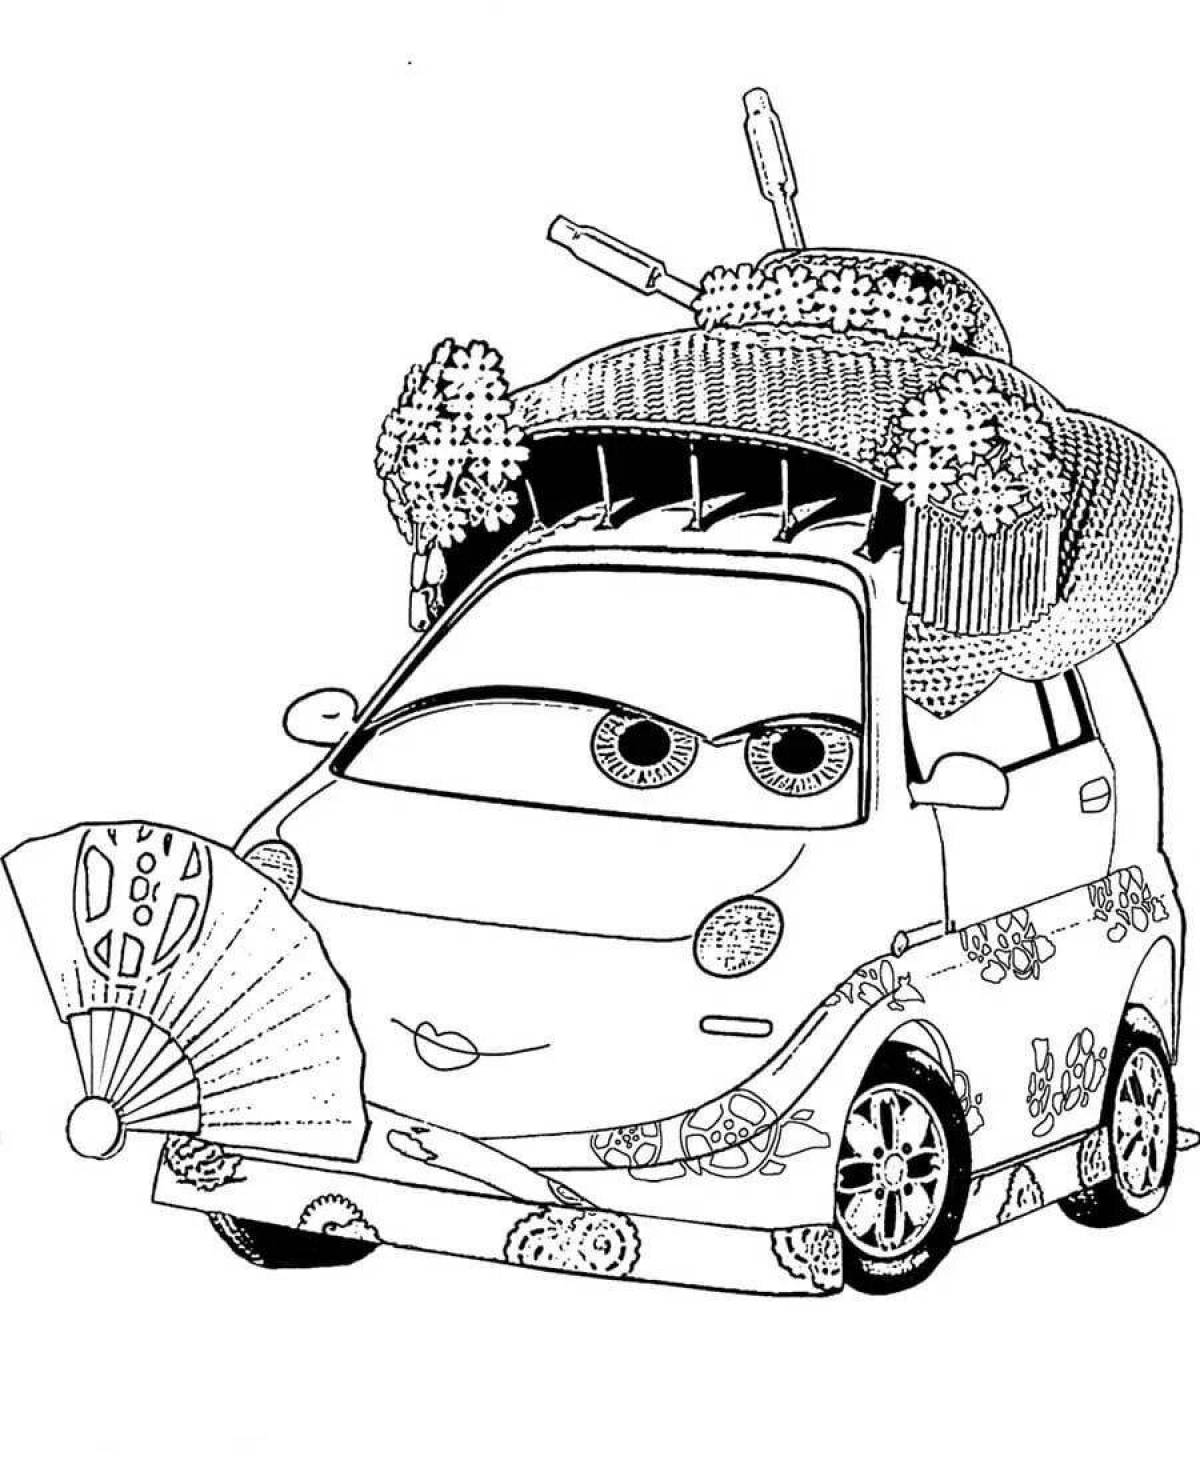 Fashionable car coloring for girls